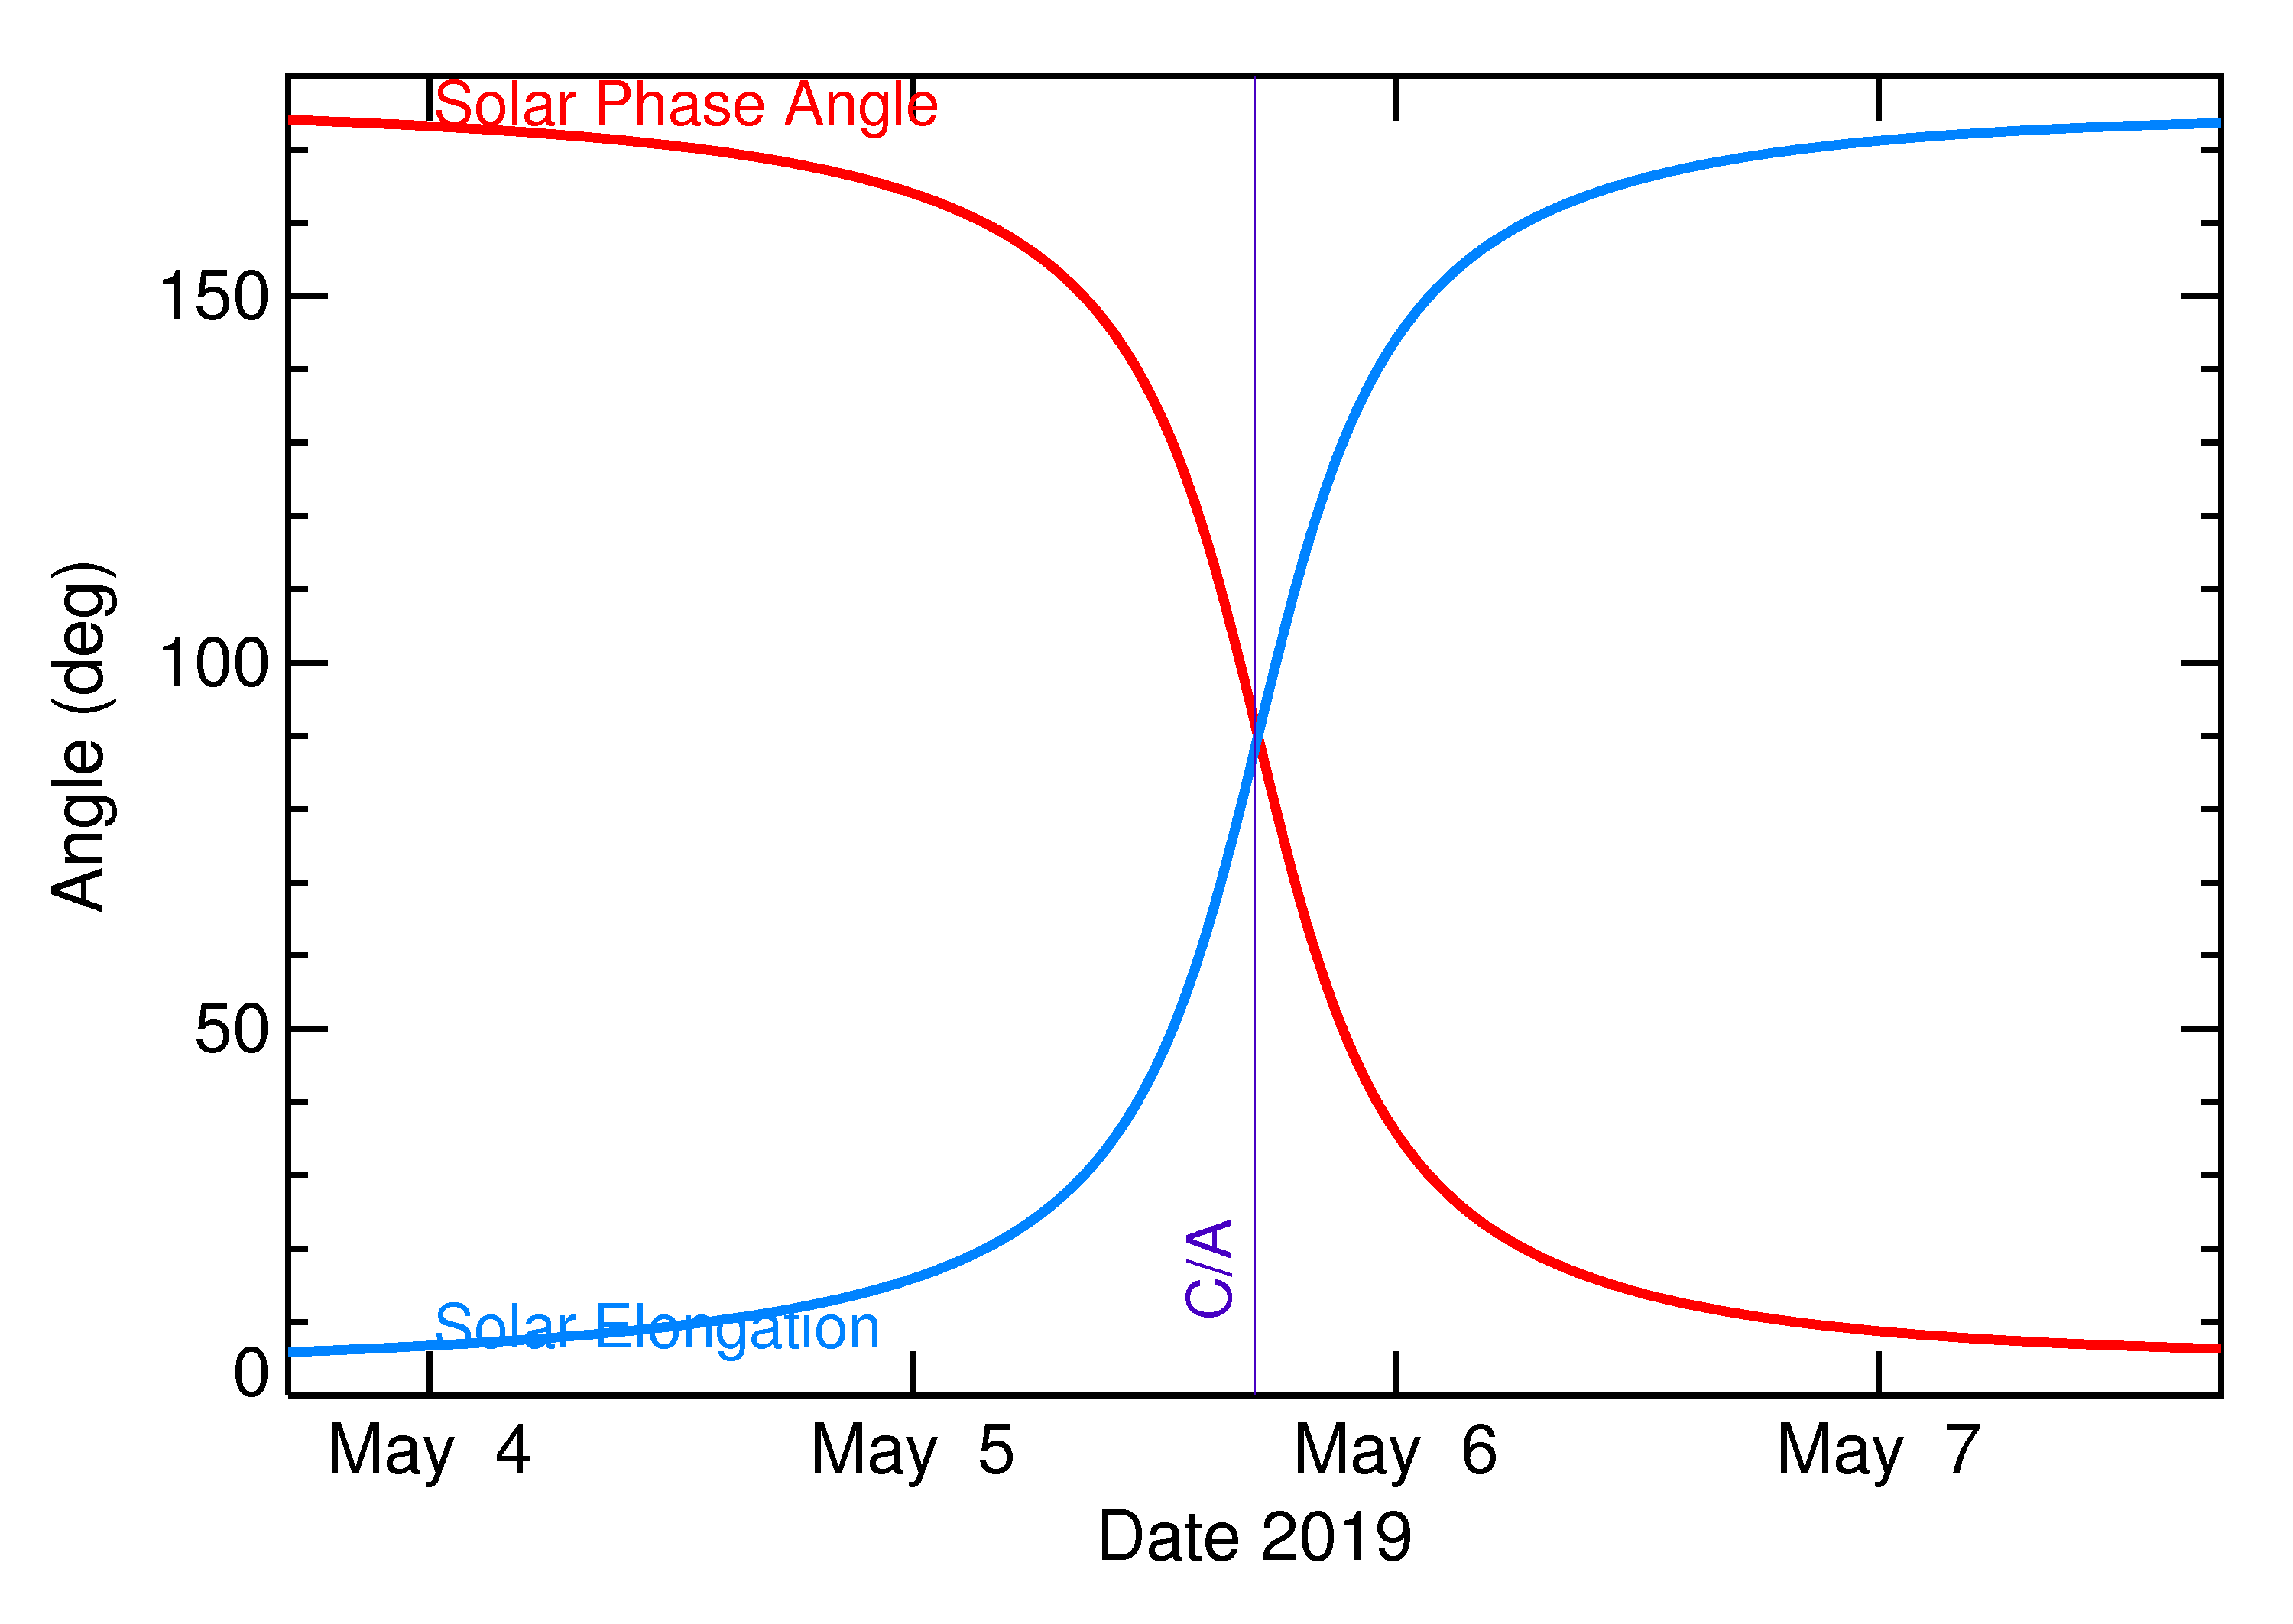 Solar Elongation and Solar Phase Angle of 2019 JY2 in the days around closest approach